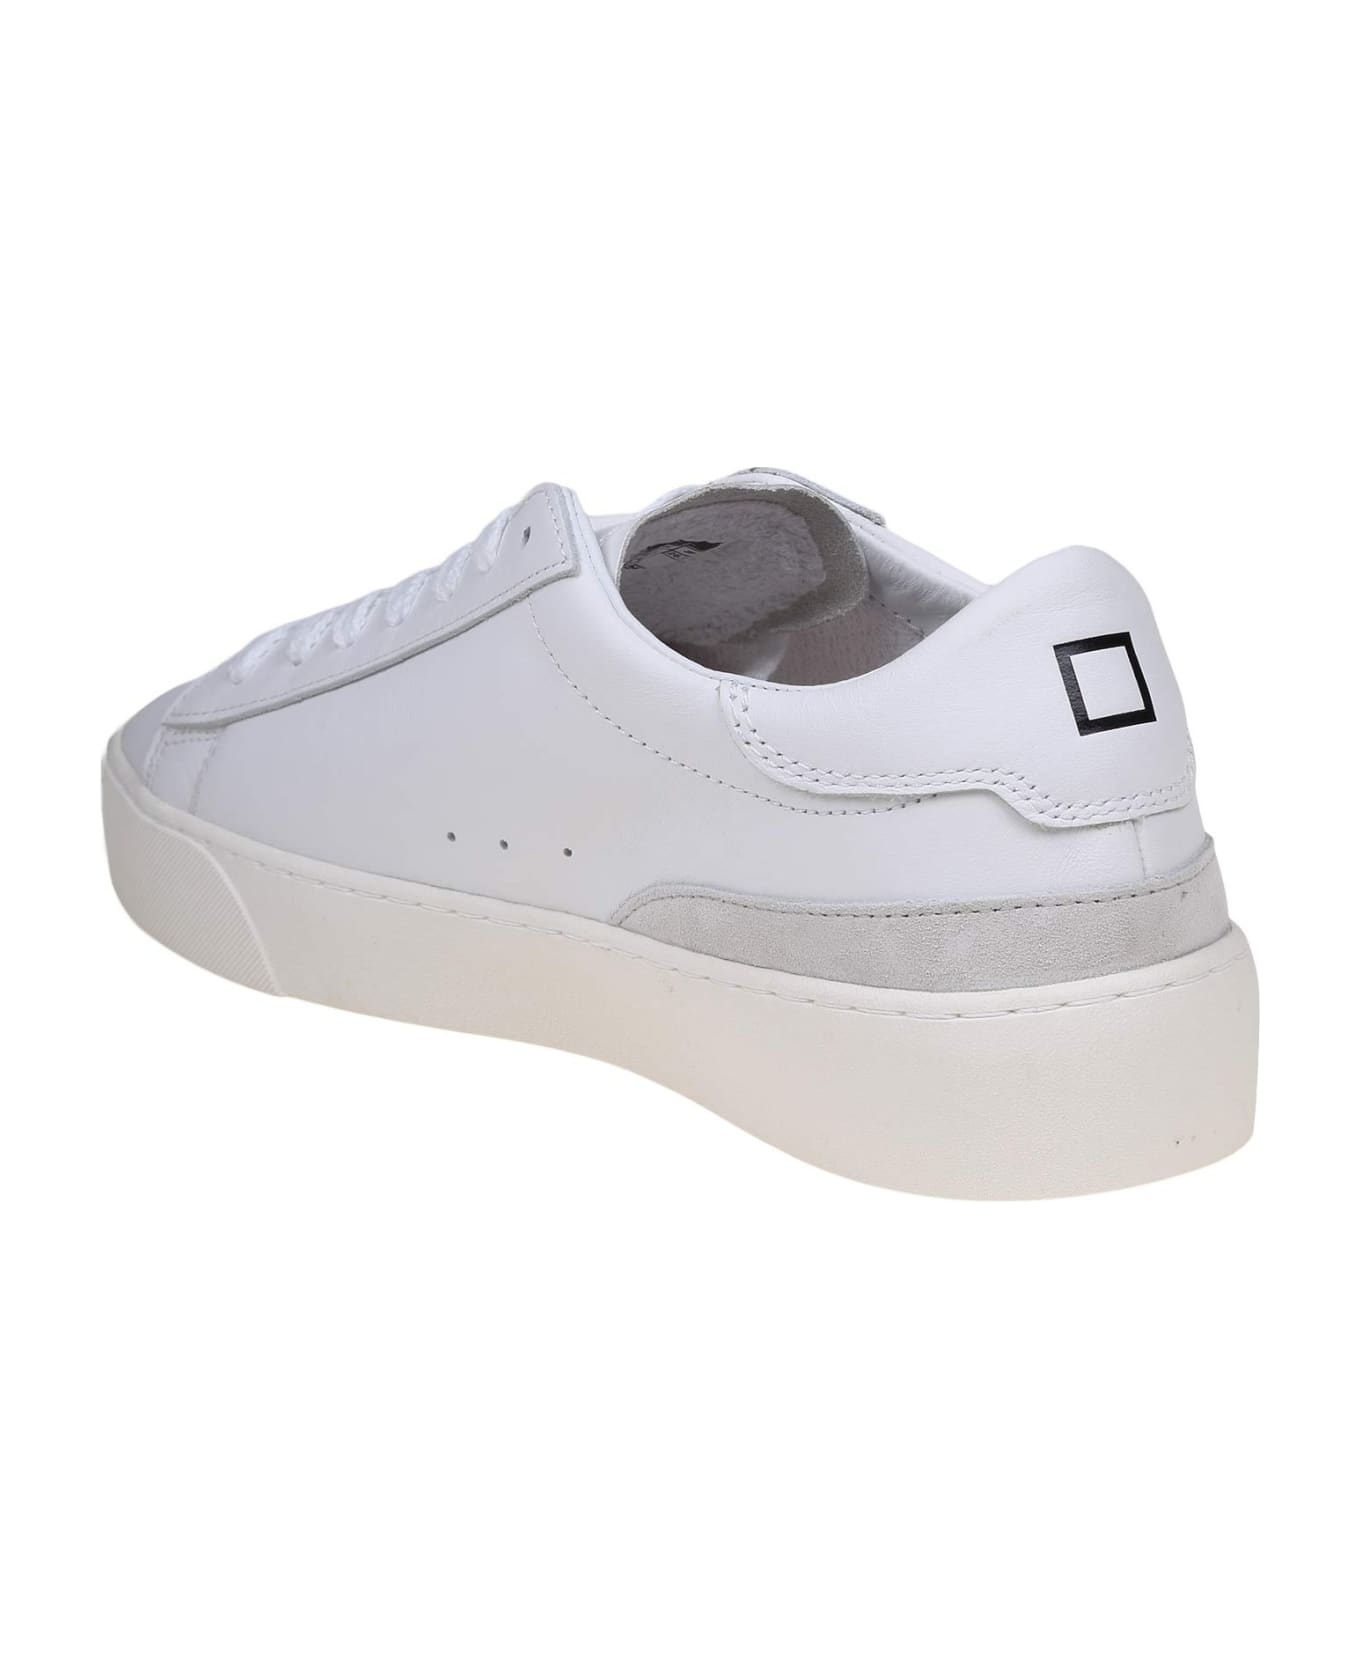 D.A.T.E. Sonica Sneakers In White Leather And Suede - White